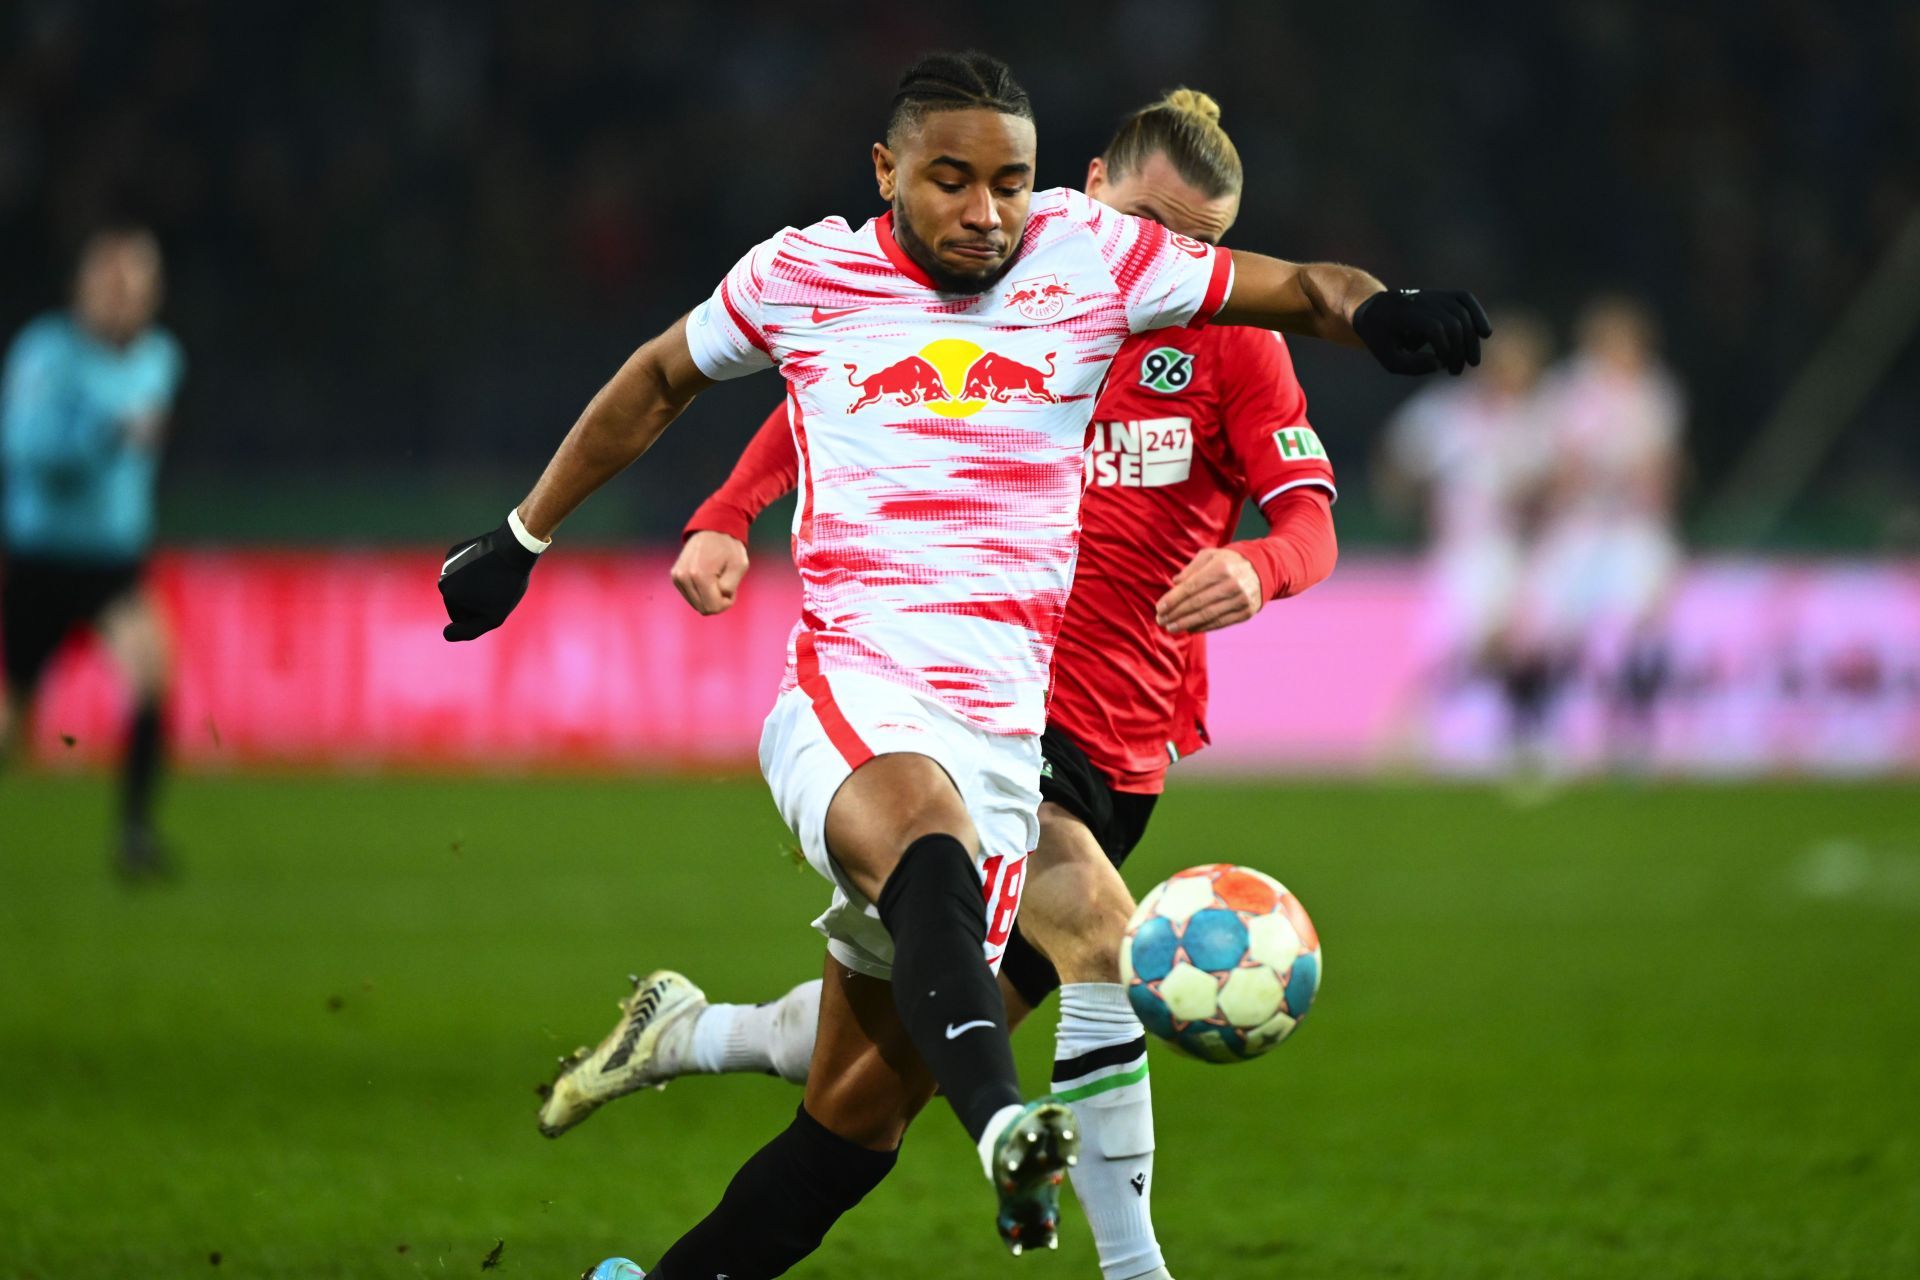 French footballer Nkunku battling for the ball in the DFB Cup quarter final